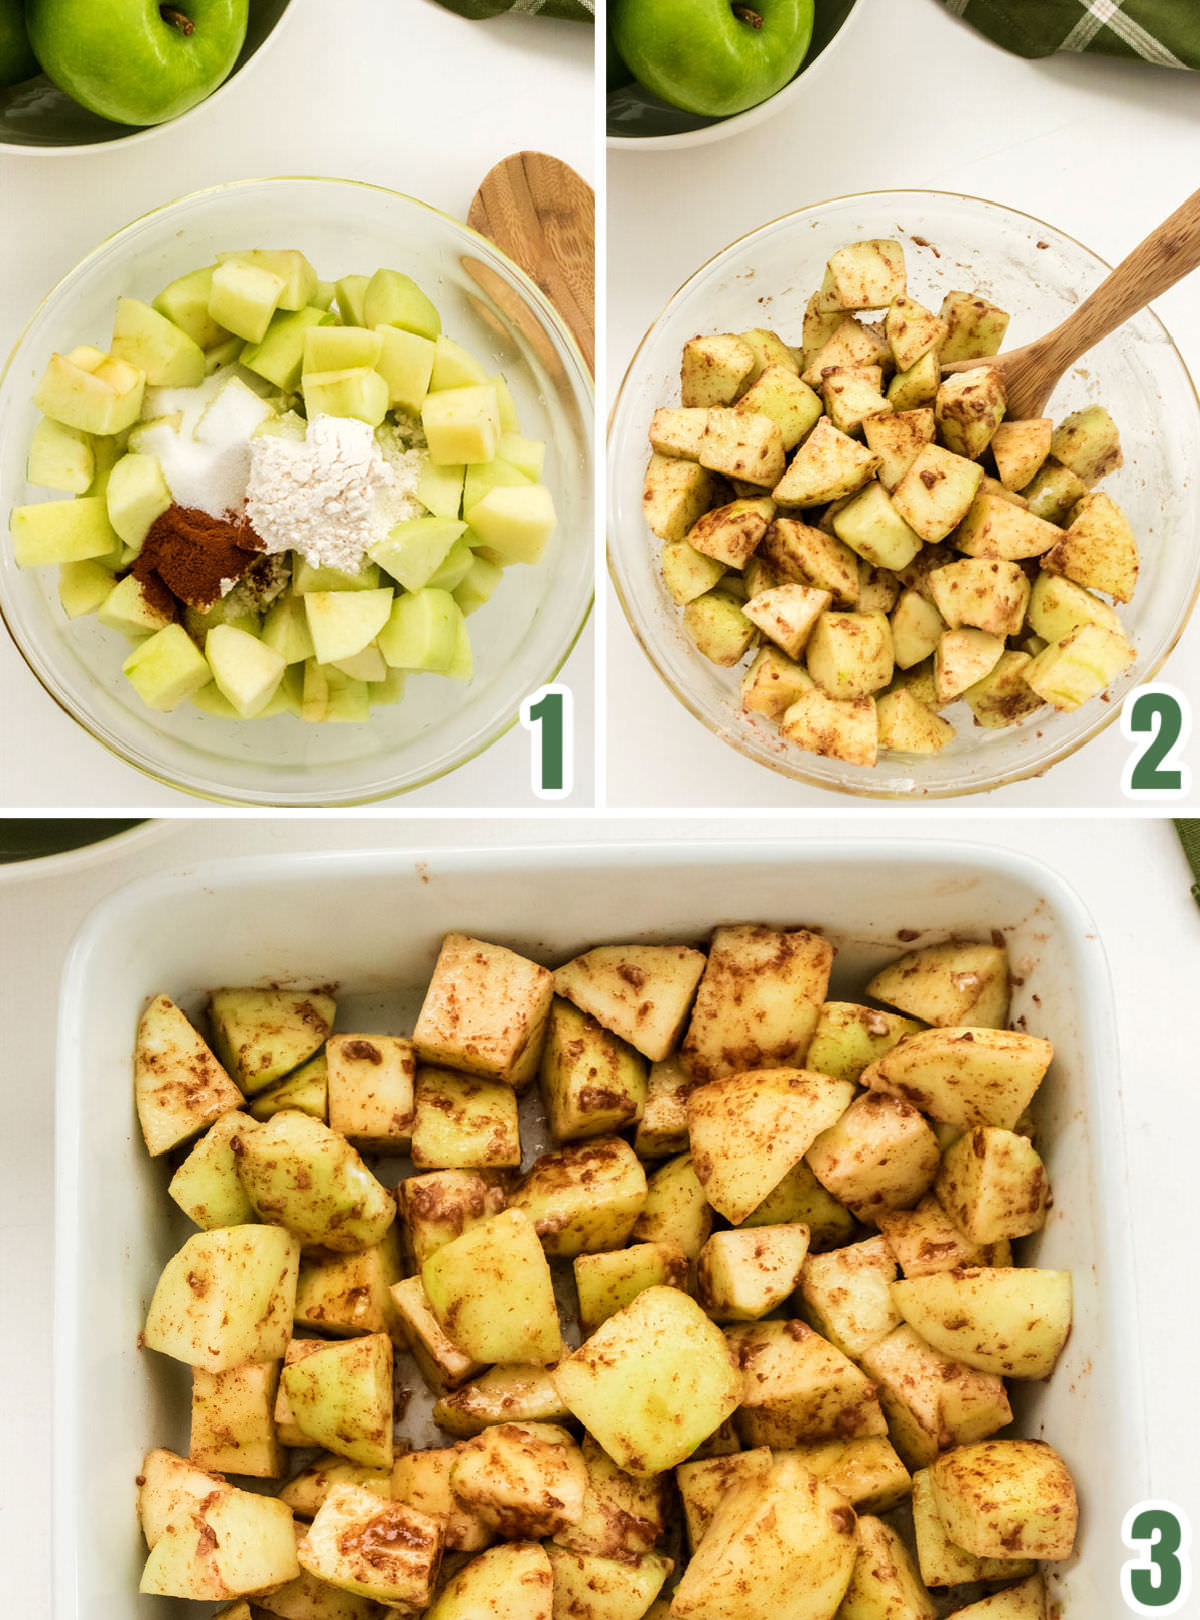 Collage image showing the steps for preparing the apples for the crisp.